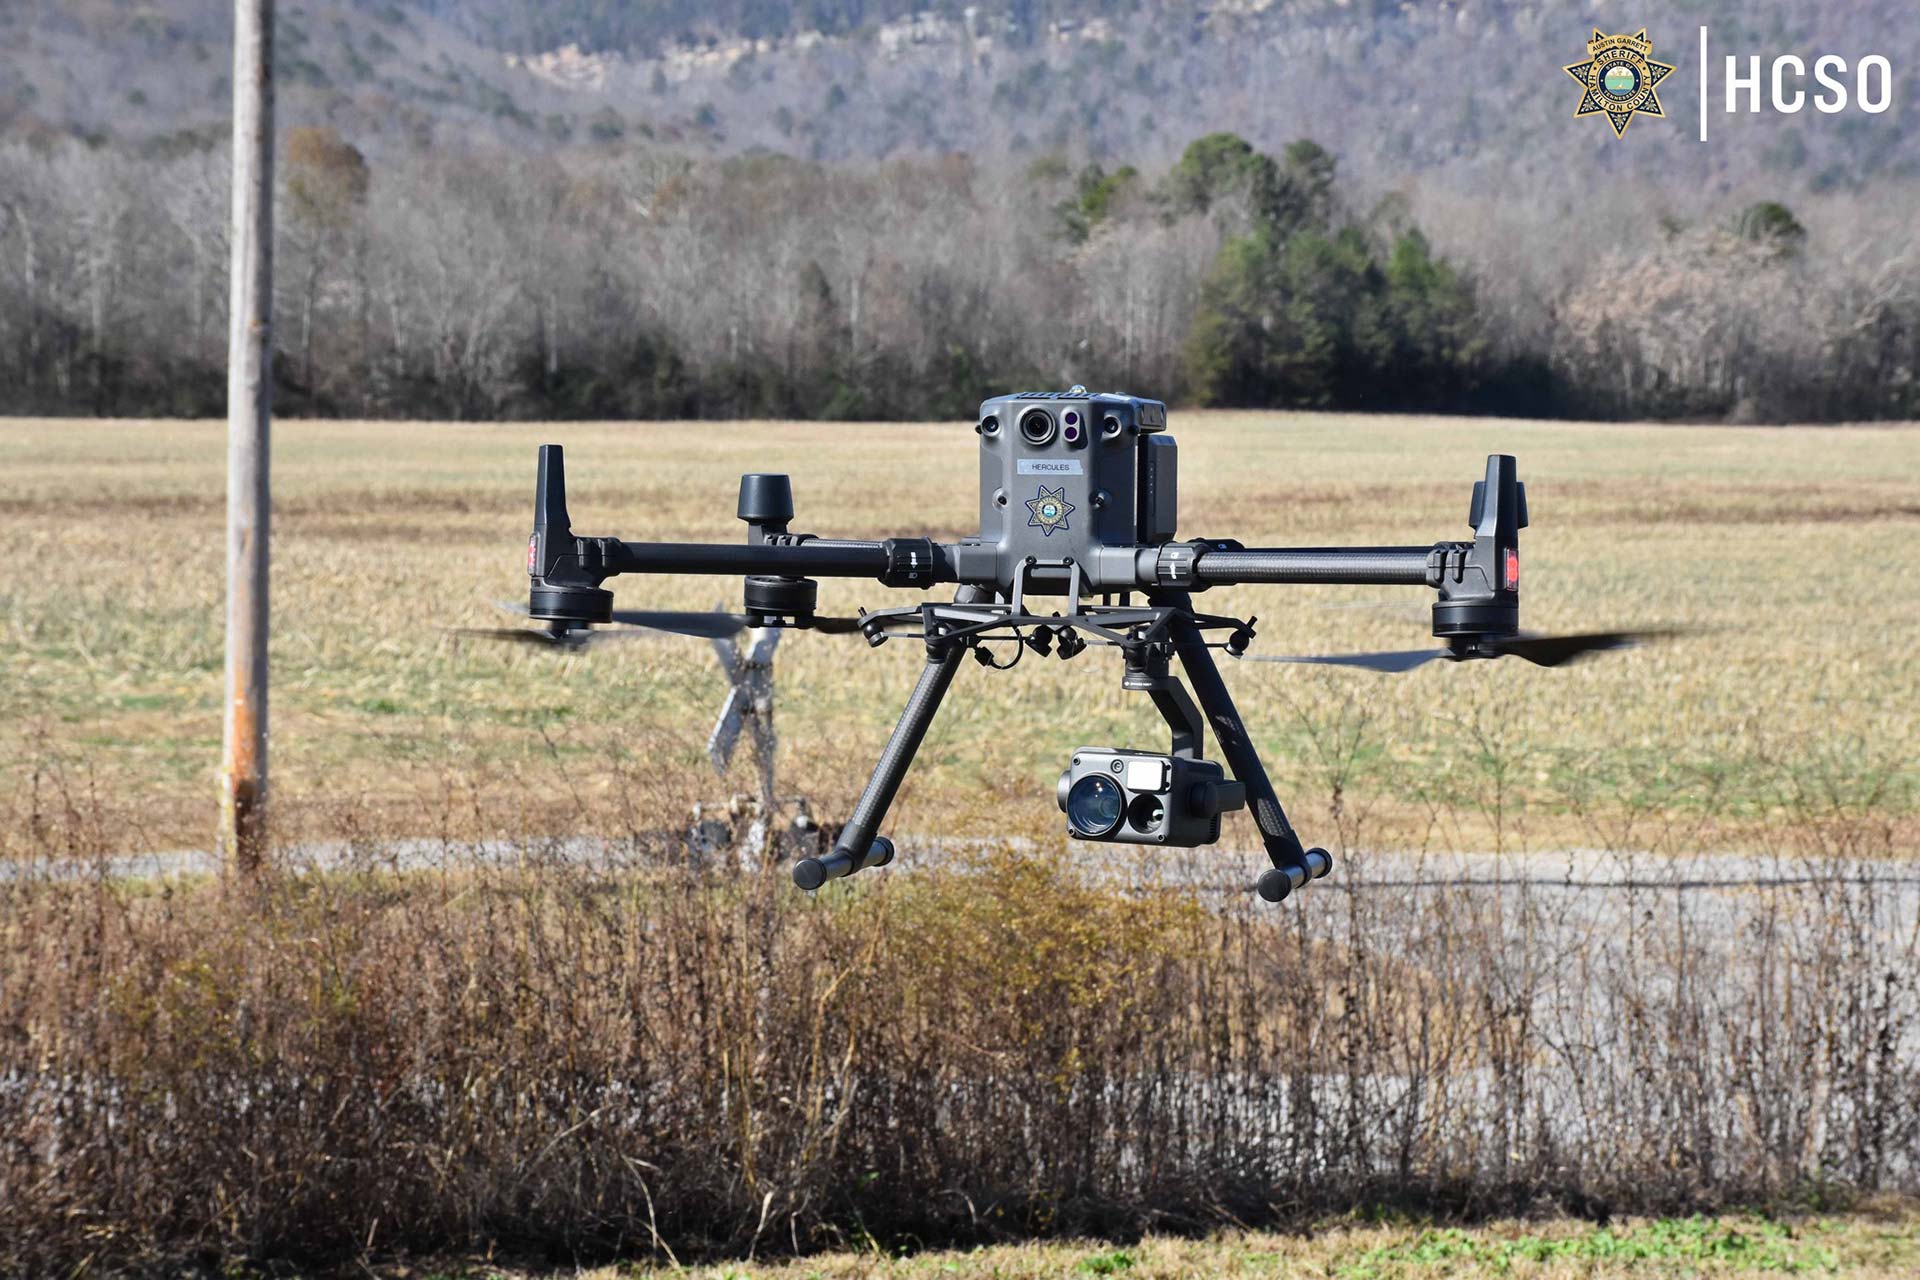 tennessee-sheriffs-office-introduces-high-tech-drone-command-van-8